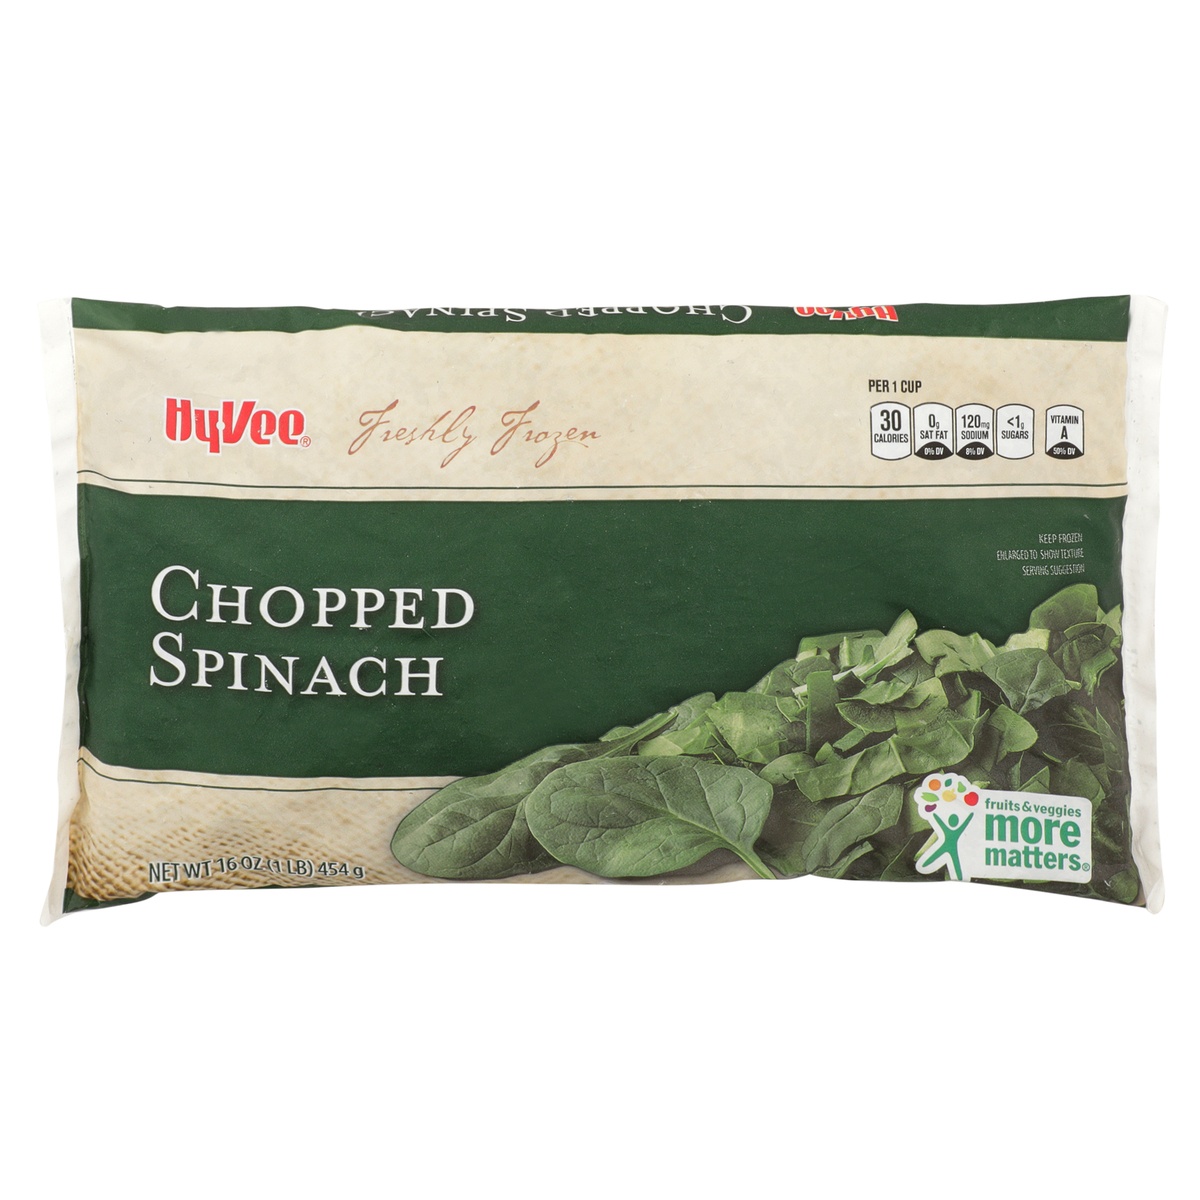 slide 1 of 1, Hy-vee Freshly Frozen Chopped Spinach, 16 oz